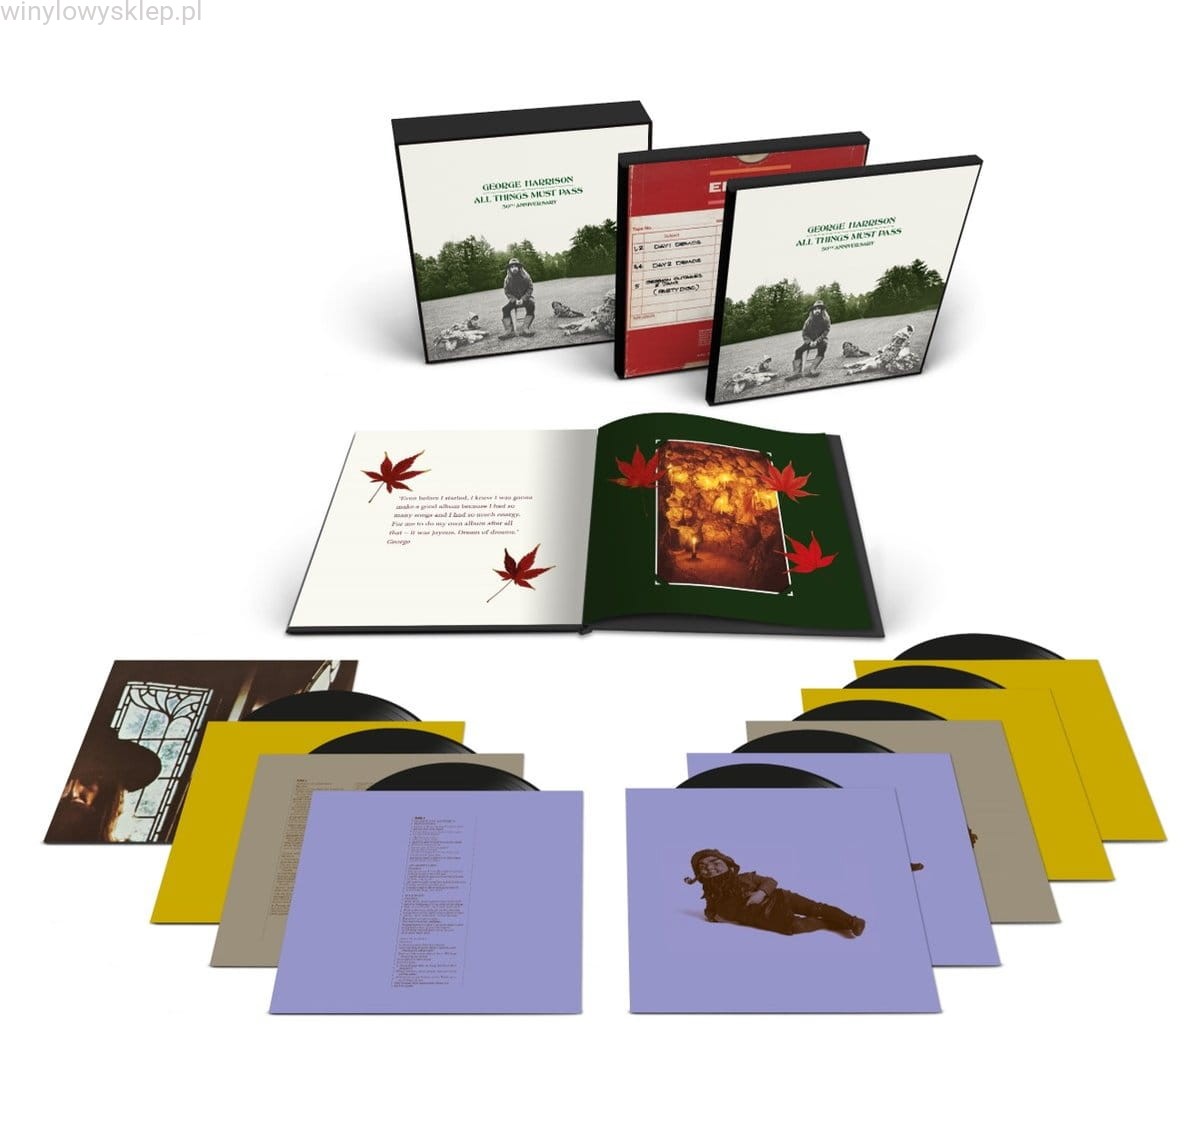 George Harrison - All Things Must Pass (8LP Deluxe Box - 50th Anniversary)